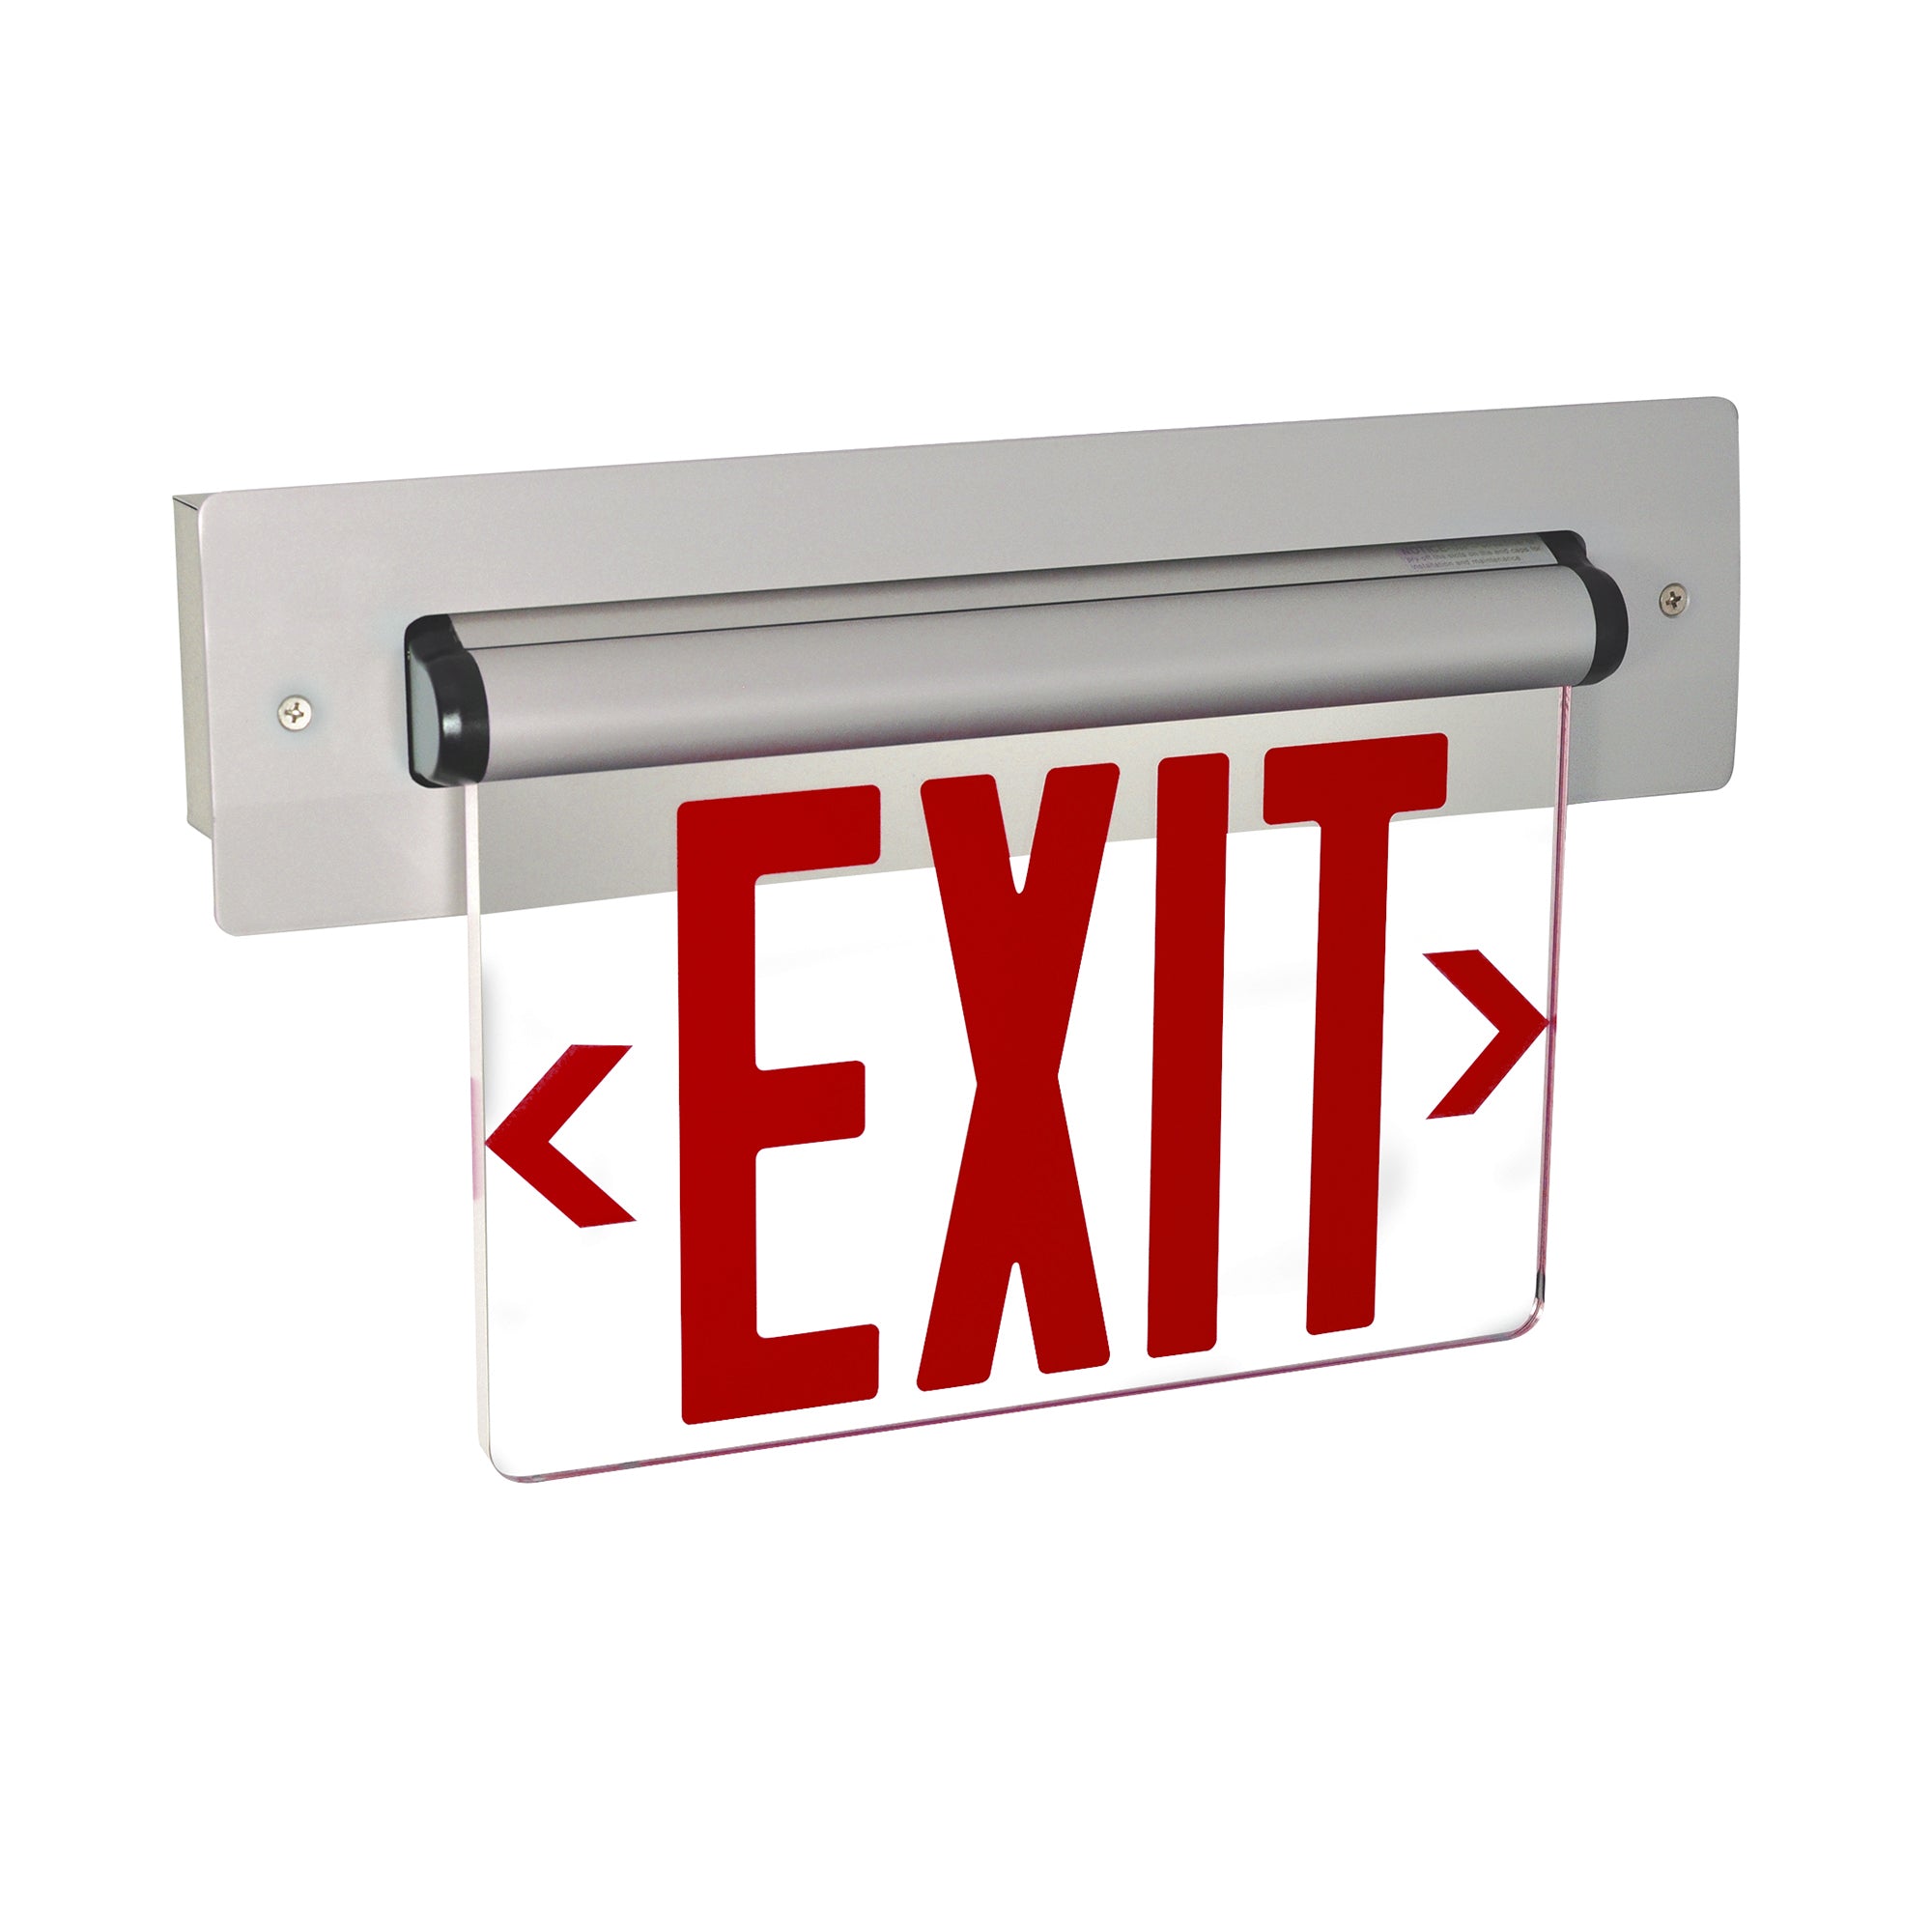 Nora Lighting NX-815-LEDRCA - Exit / Emergency - Recessed Adjustable LED Edge-Lit Exit Sign, Battery Backup, 6 Inch Red Letters, Single Face / Clear Acrylic, Aluminum Housing